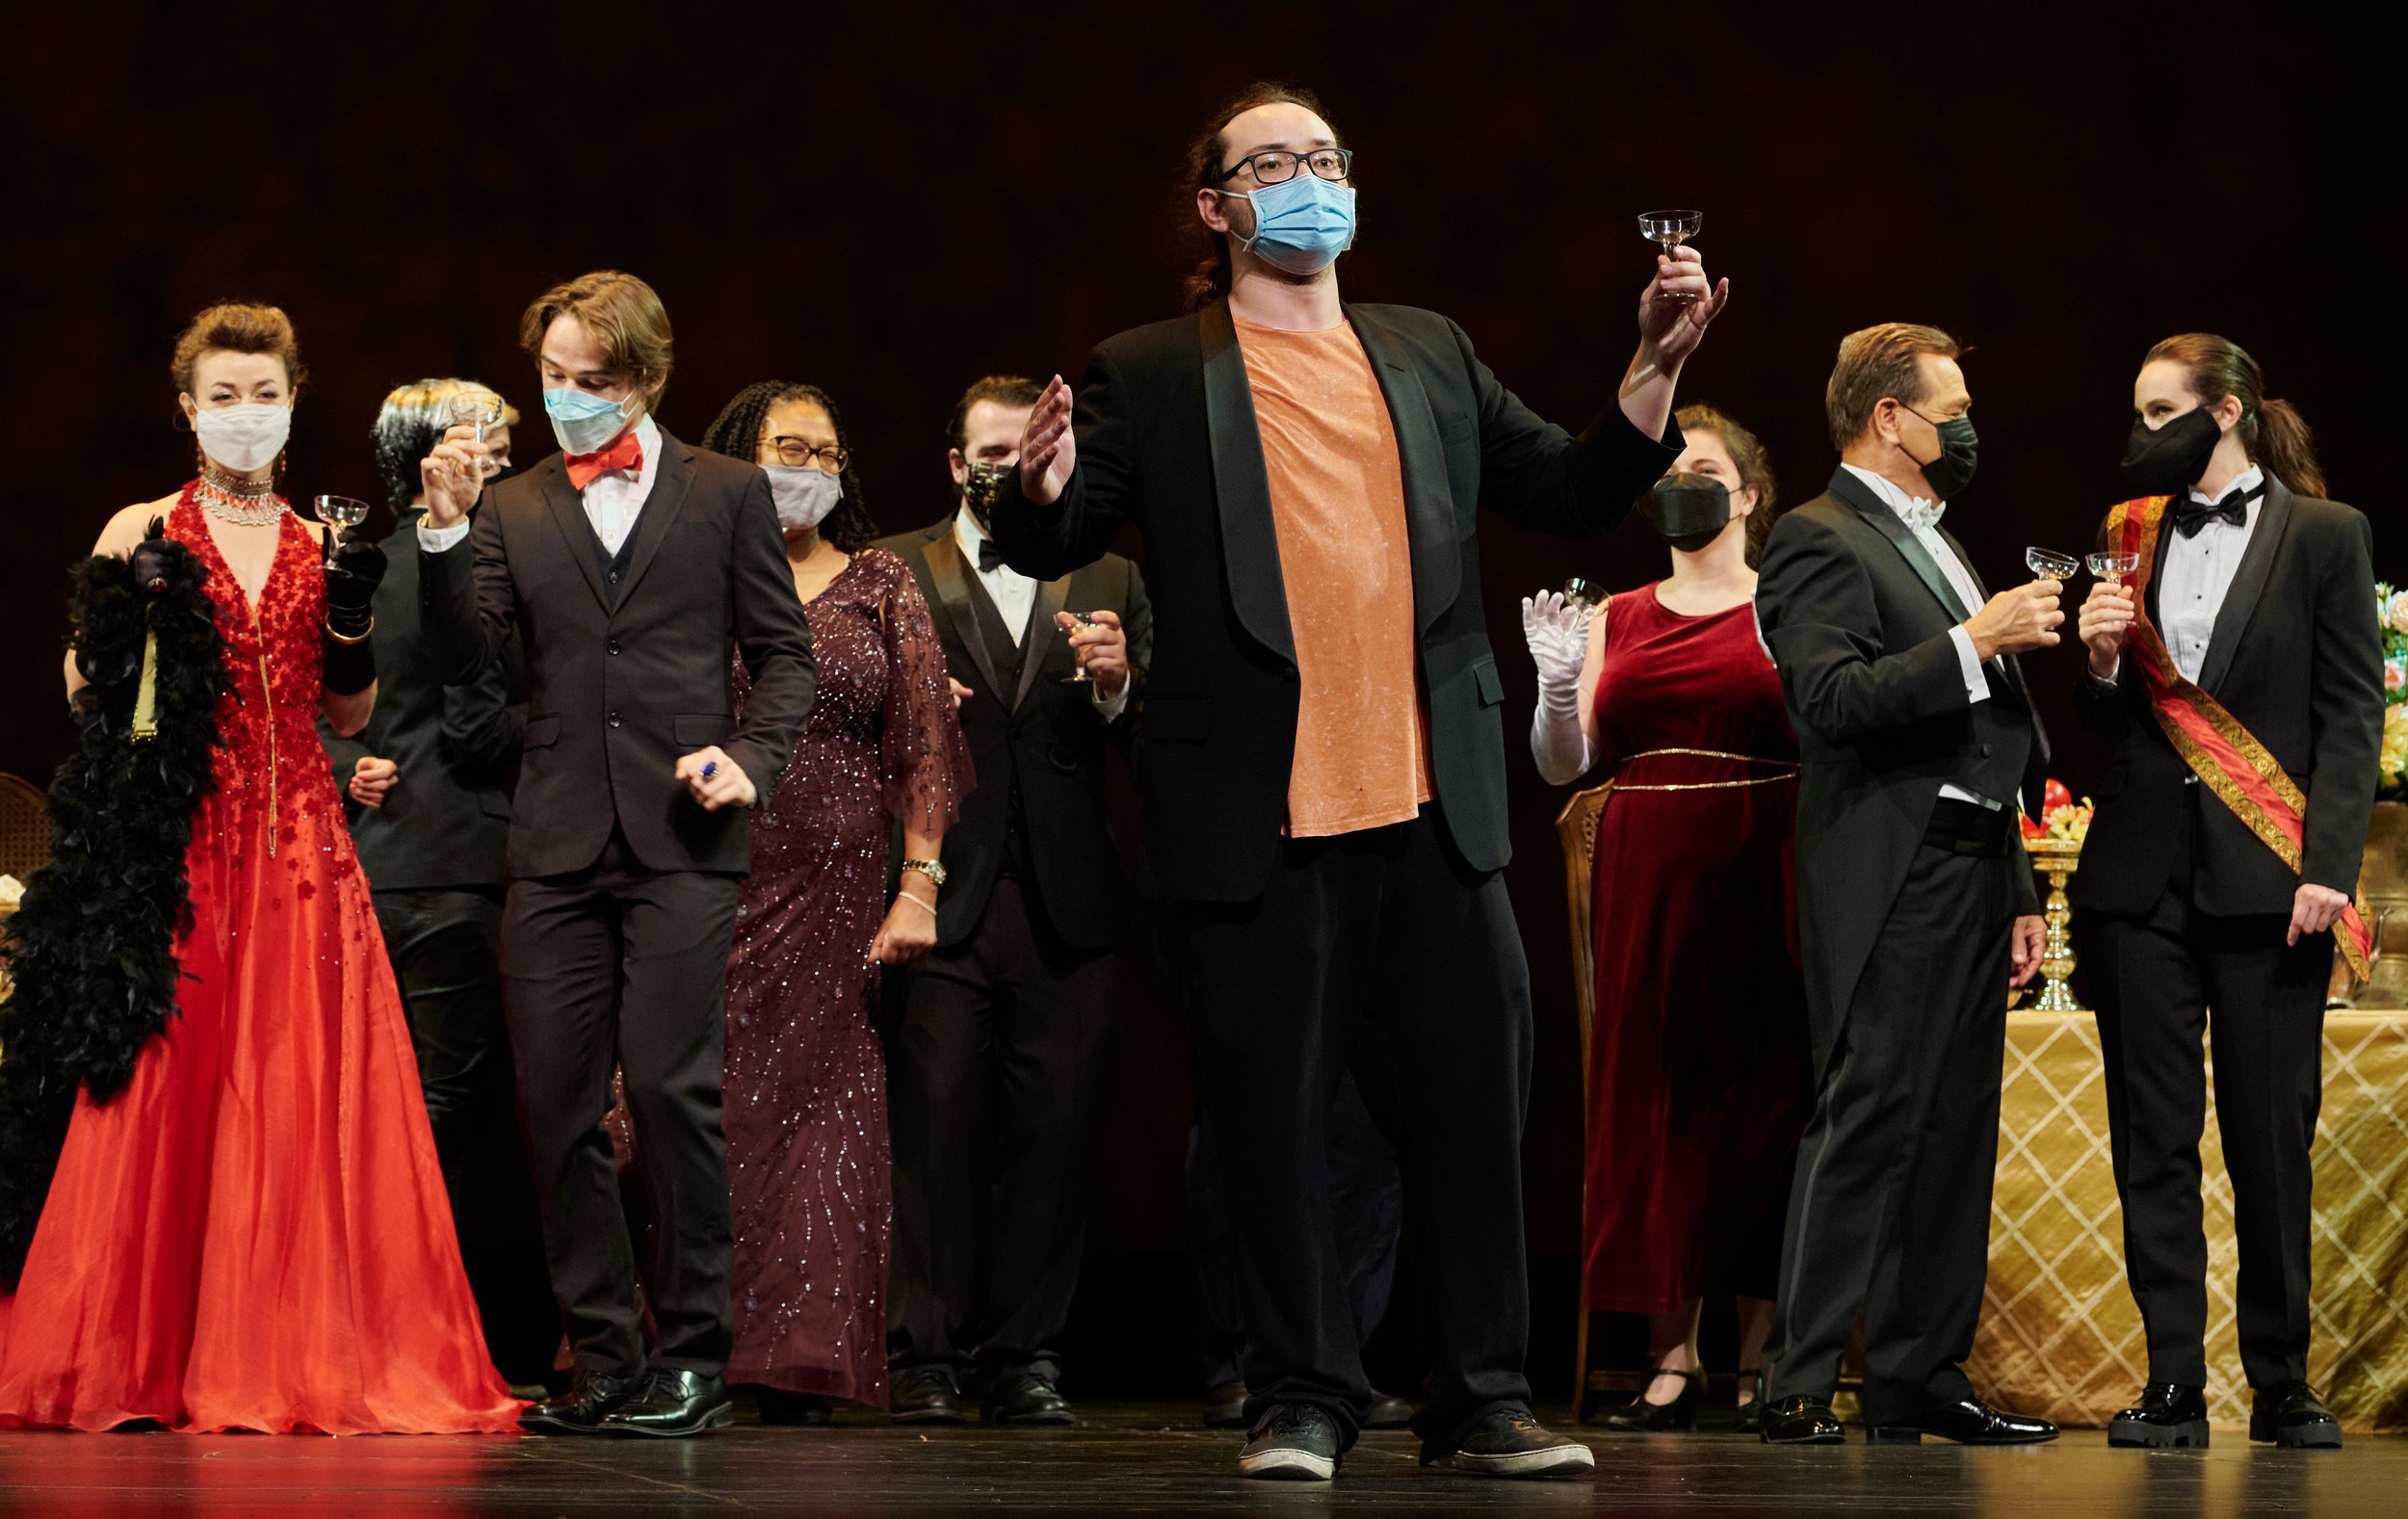  George Froehlig (center) and cast during dress rehearsal of the Santa Monica College Opera Theatre production of "Die Fledermaus" at The Broad Stage on Wednesday, May 18, 2022, in Santa Monica, Calif. (Nicholas McCall | The Corsair) 